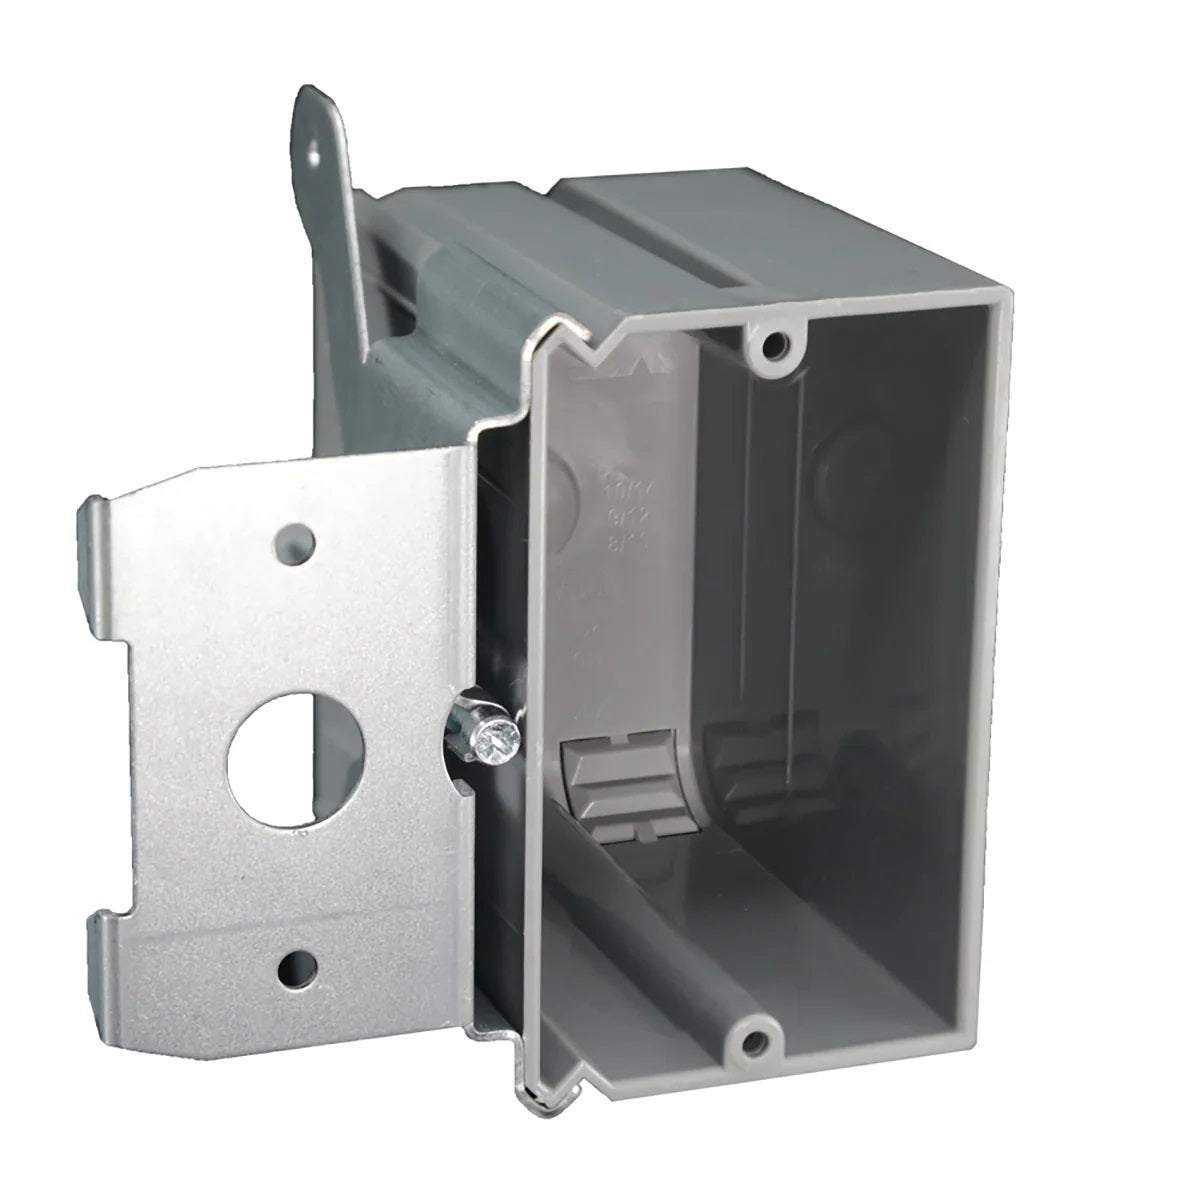 Non-Metallic One-Gang Adjustable Vertical Outlet Box - New Work, 21 Cubic